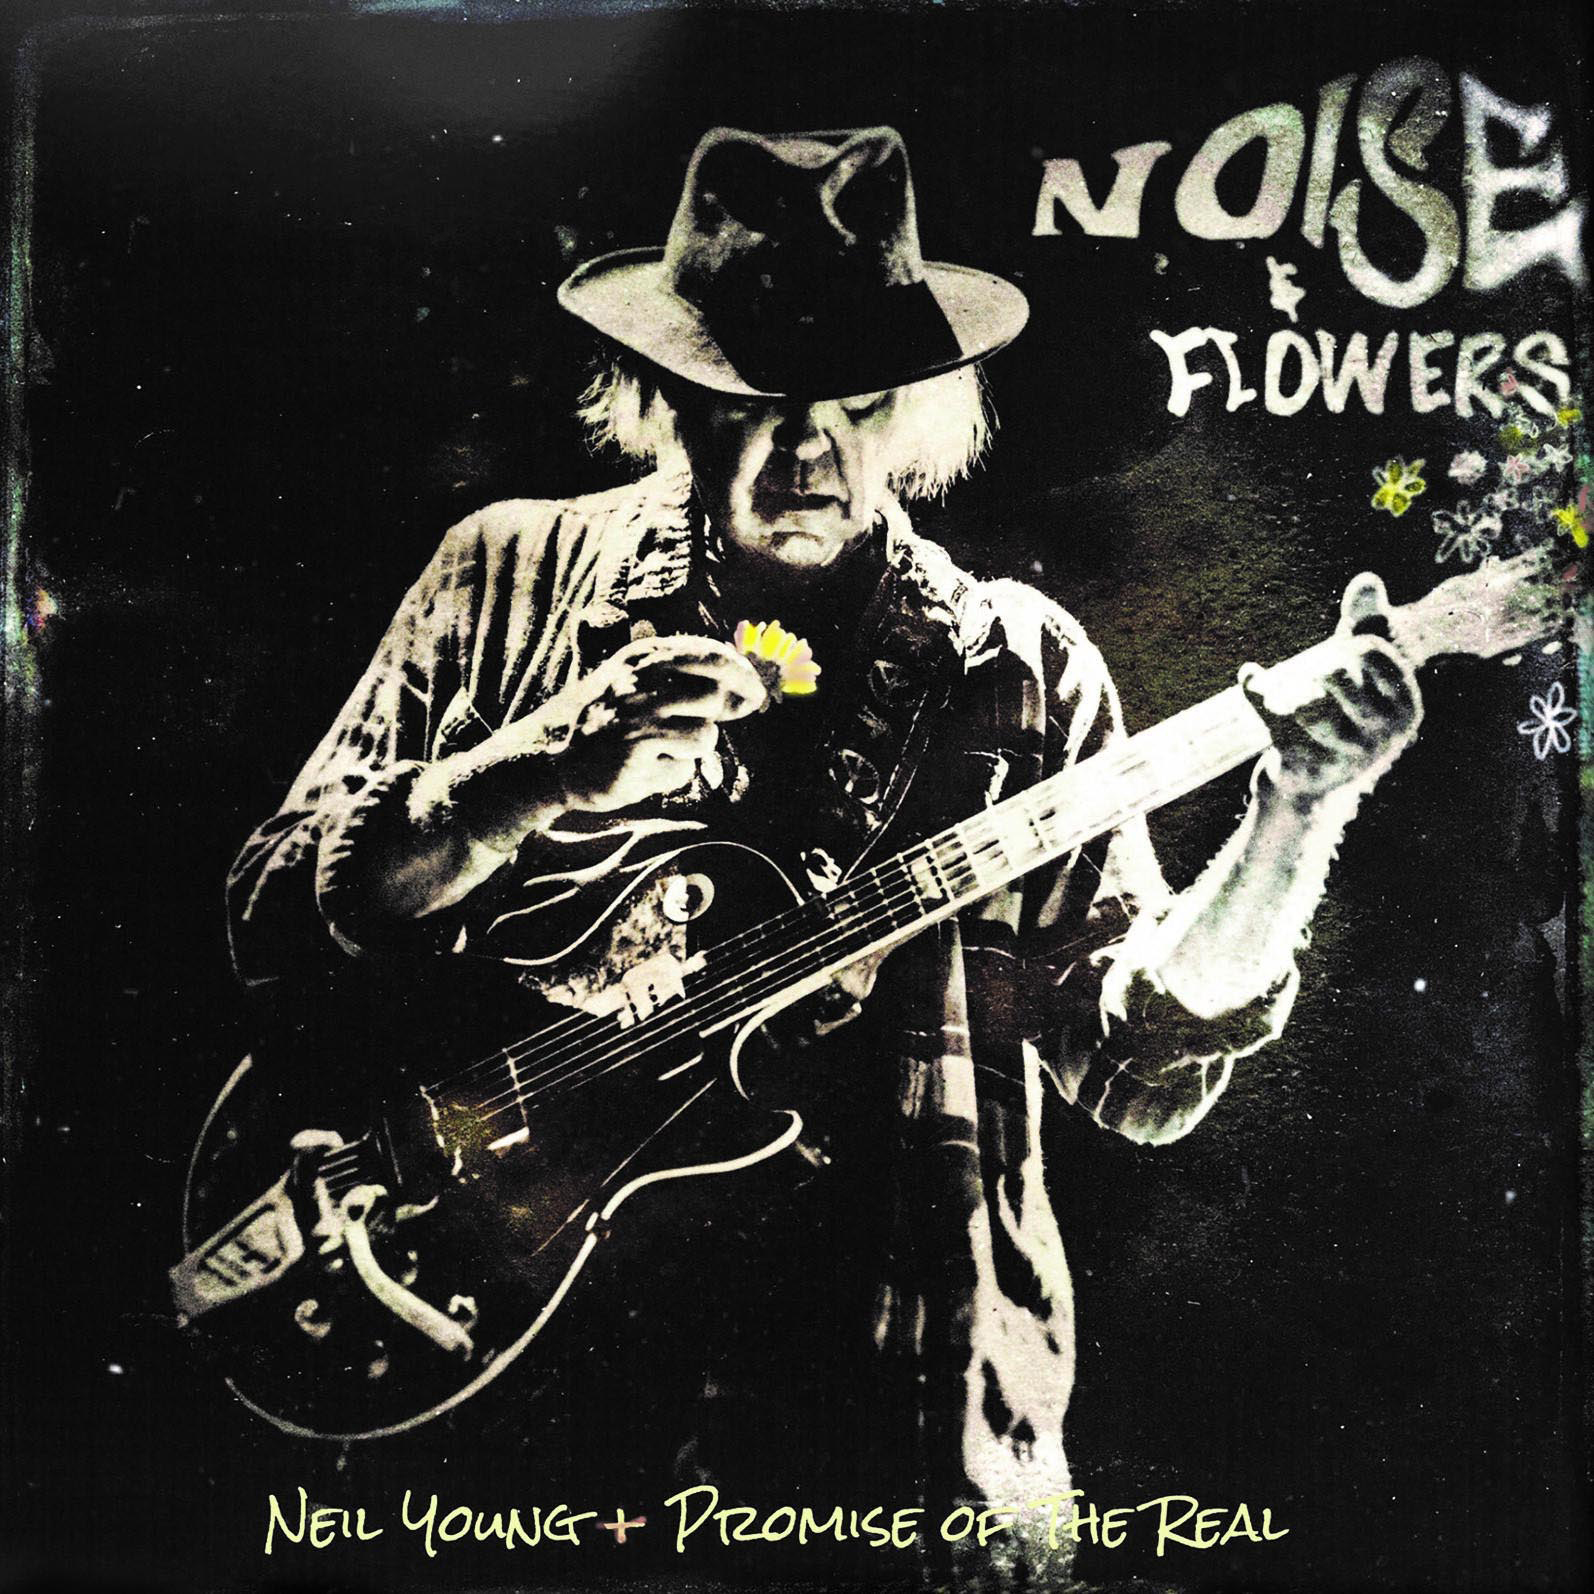 Neil FLOWERS (Box The + Promise NOISE - set) And - Young Of Real